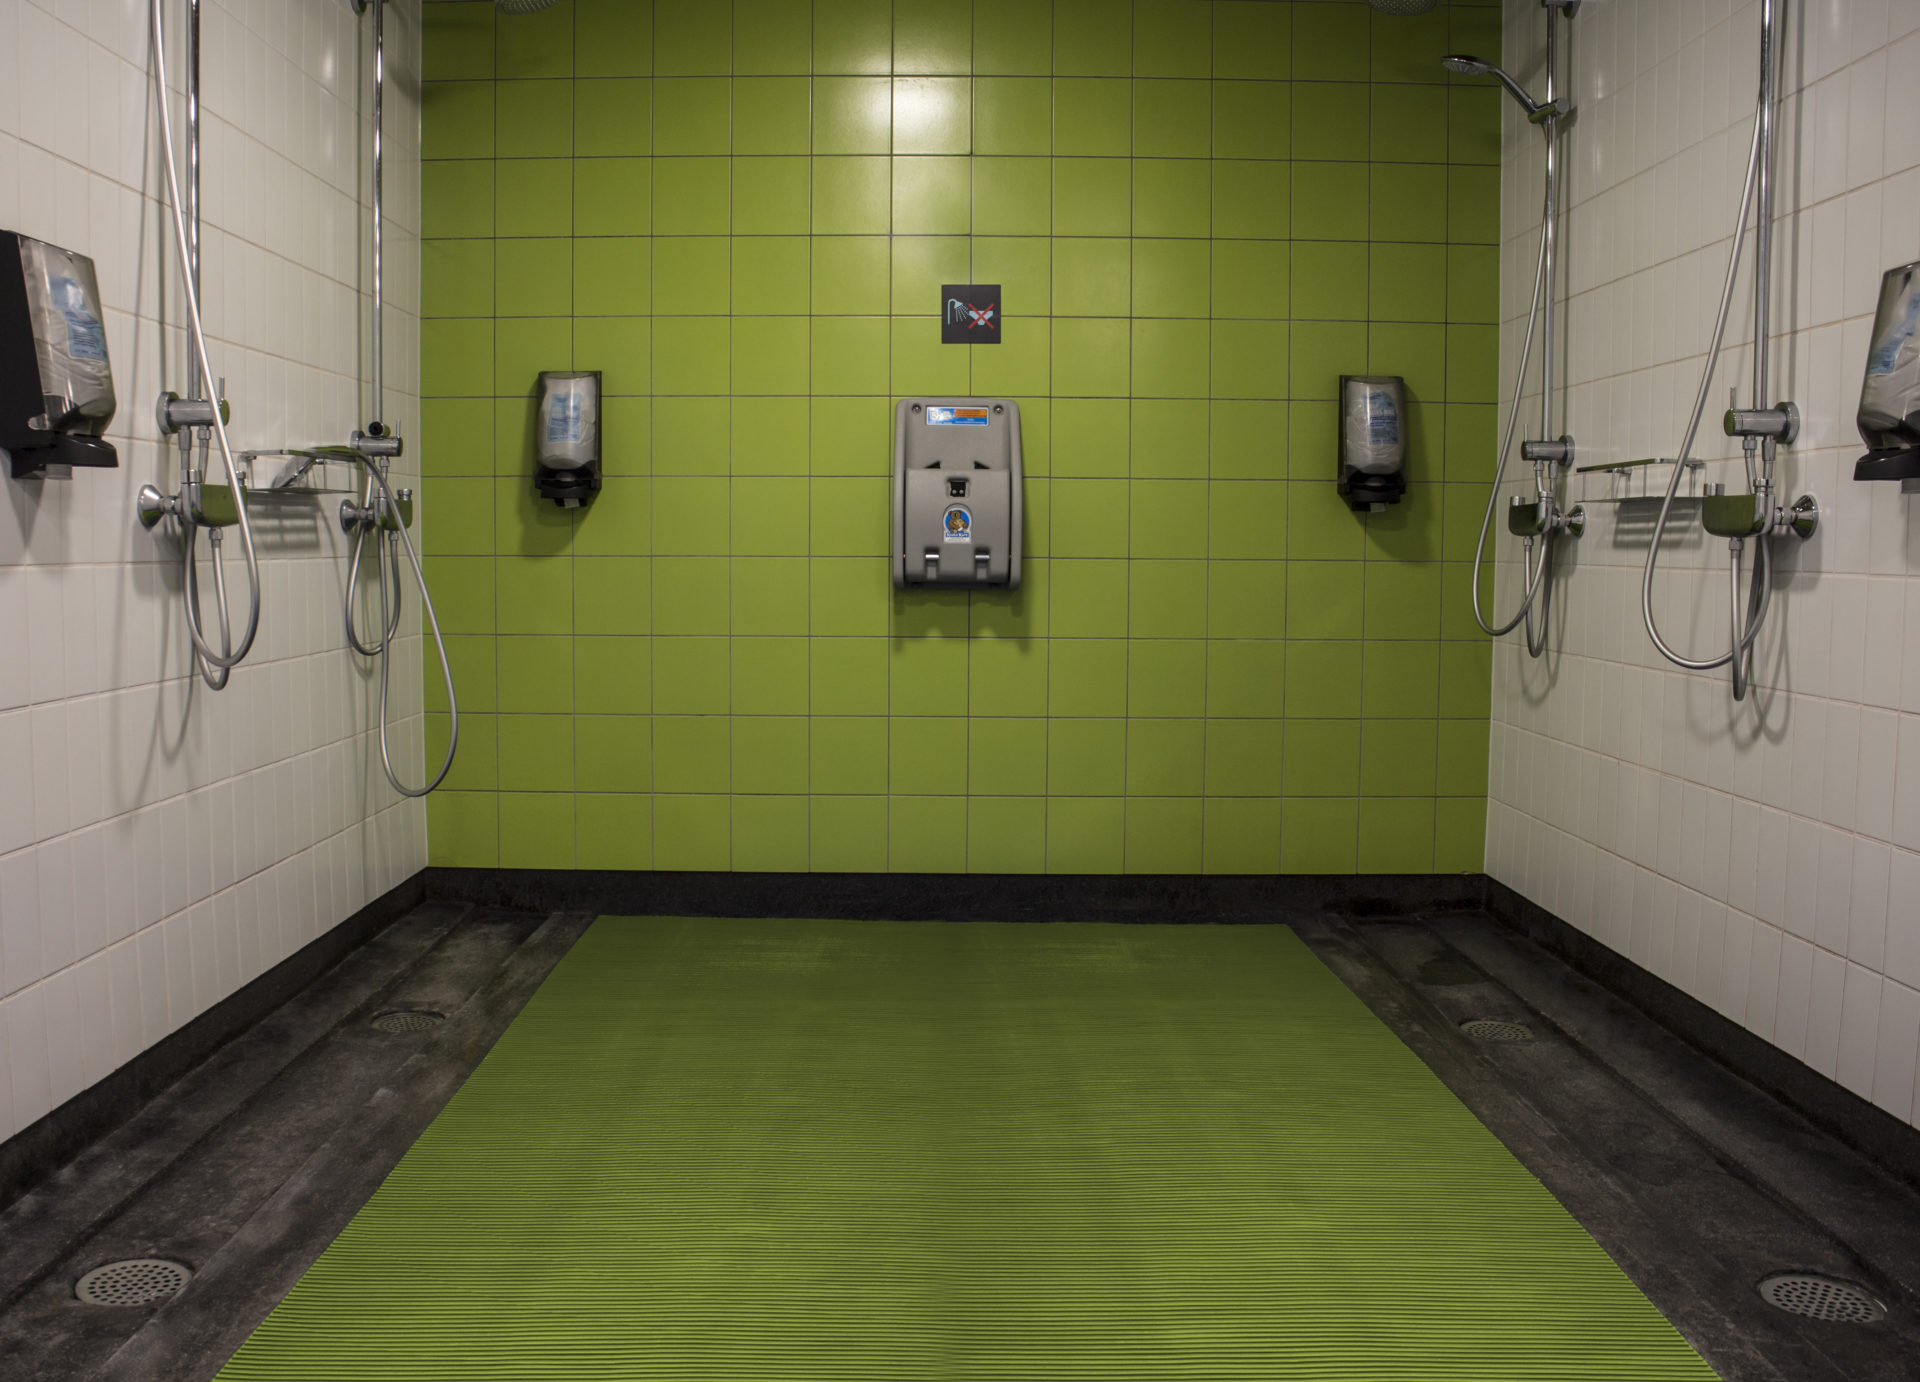 Green mat in shower area